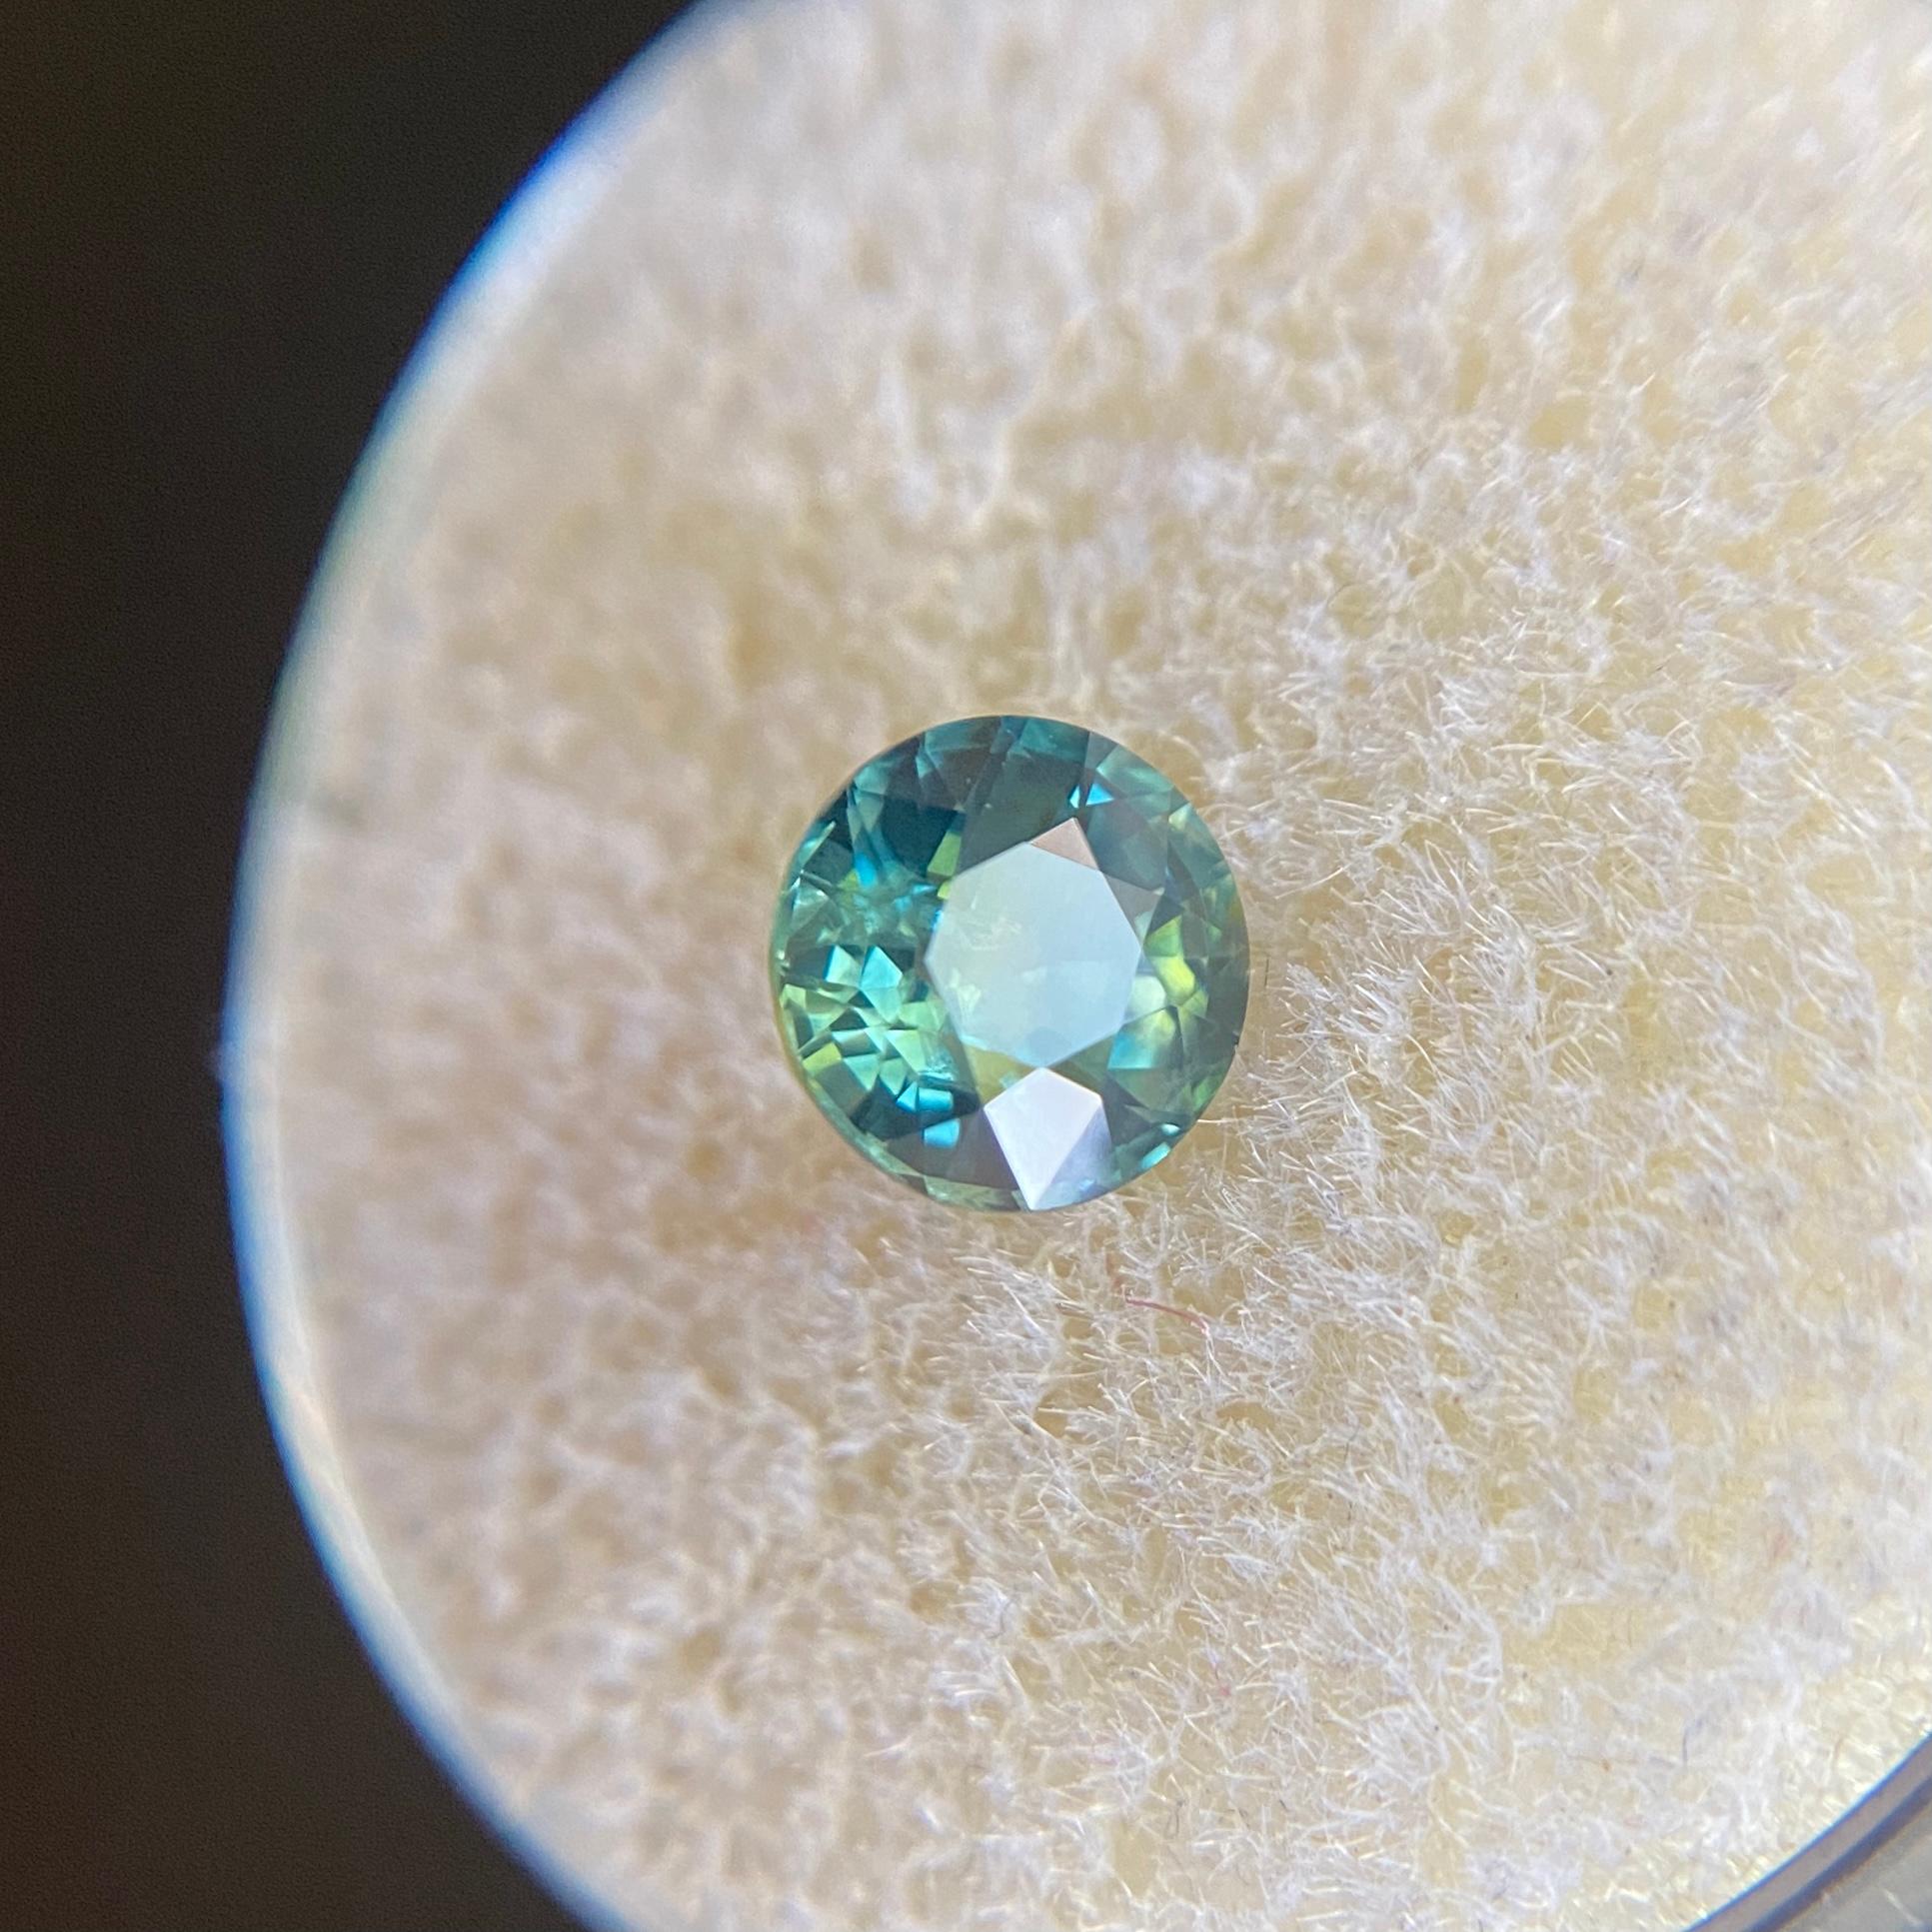 Fine Natural Australian Blue Green Sapphire Gemstone.

1.21 Carat with a beautiful and unique blue green colour and good clarity, clean stone with only some small natural inclusions visible when looking closely.

Also has an excellent round cut and